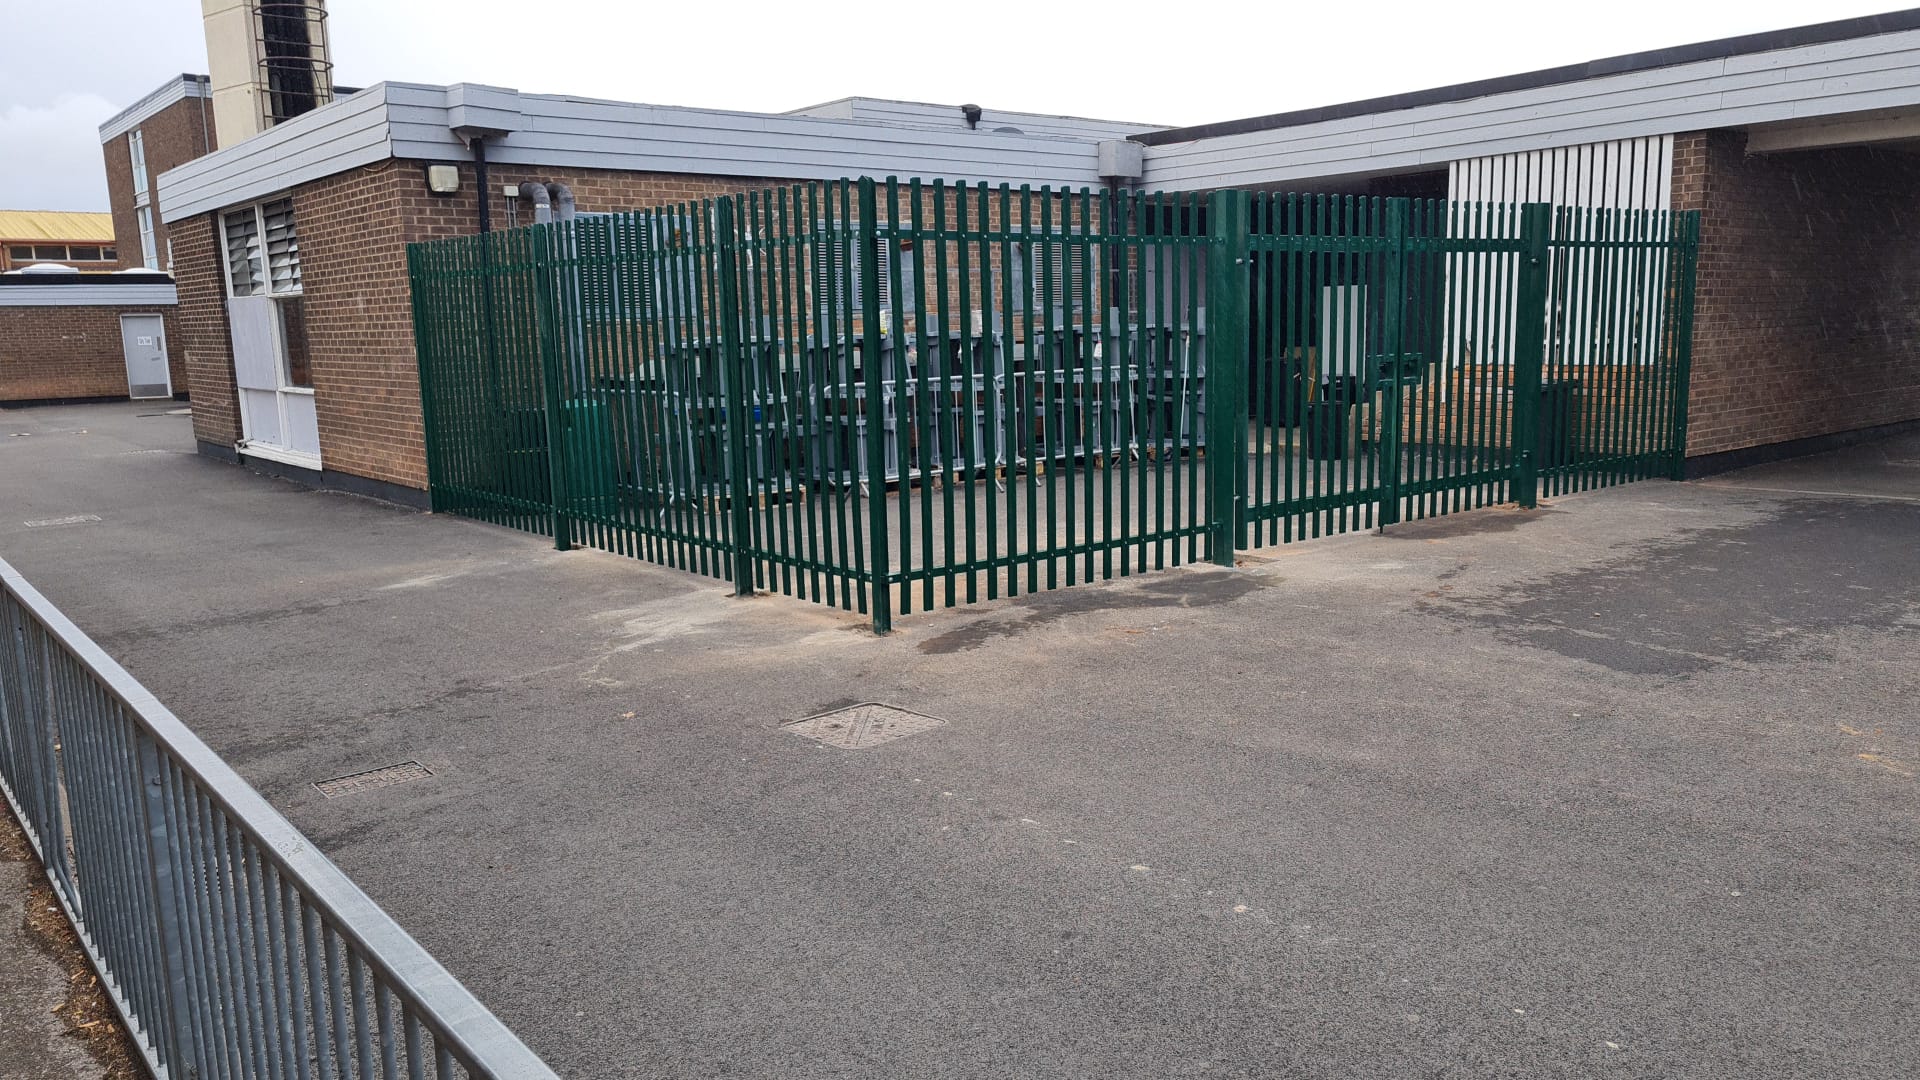 Round & Notched Palisade Fencing Supplied & Installed for a School in Doncaster